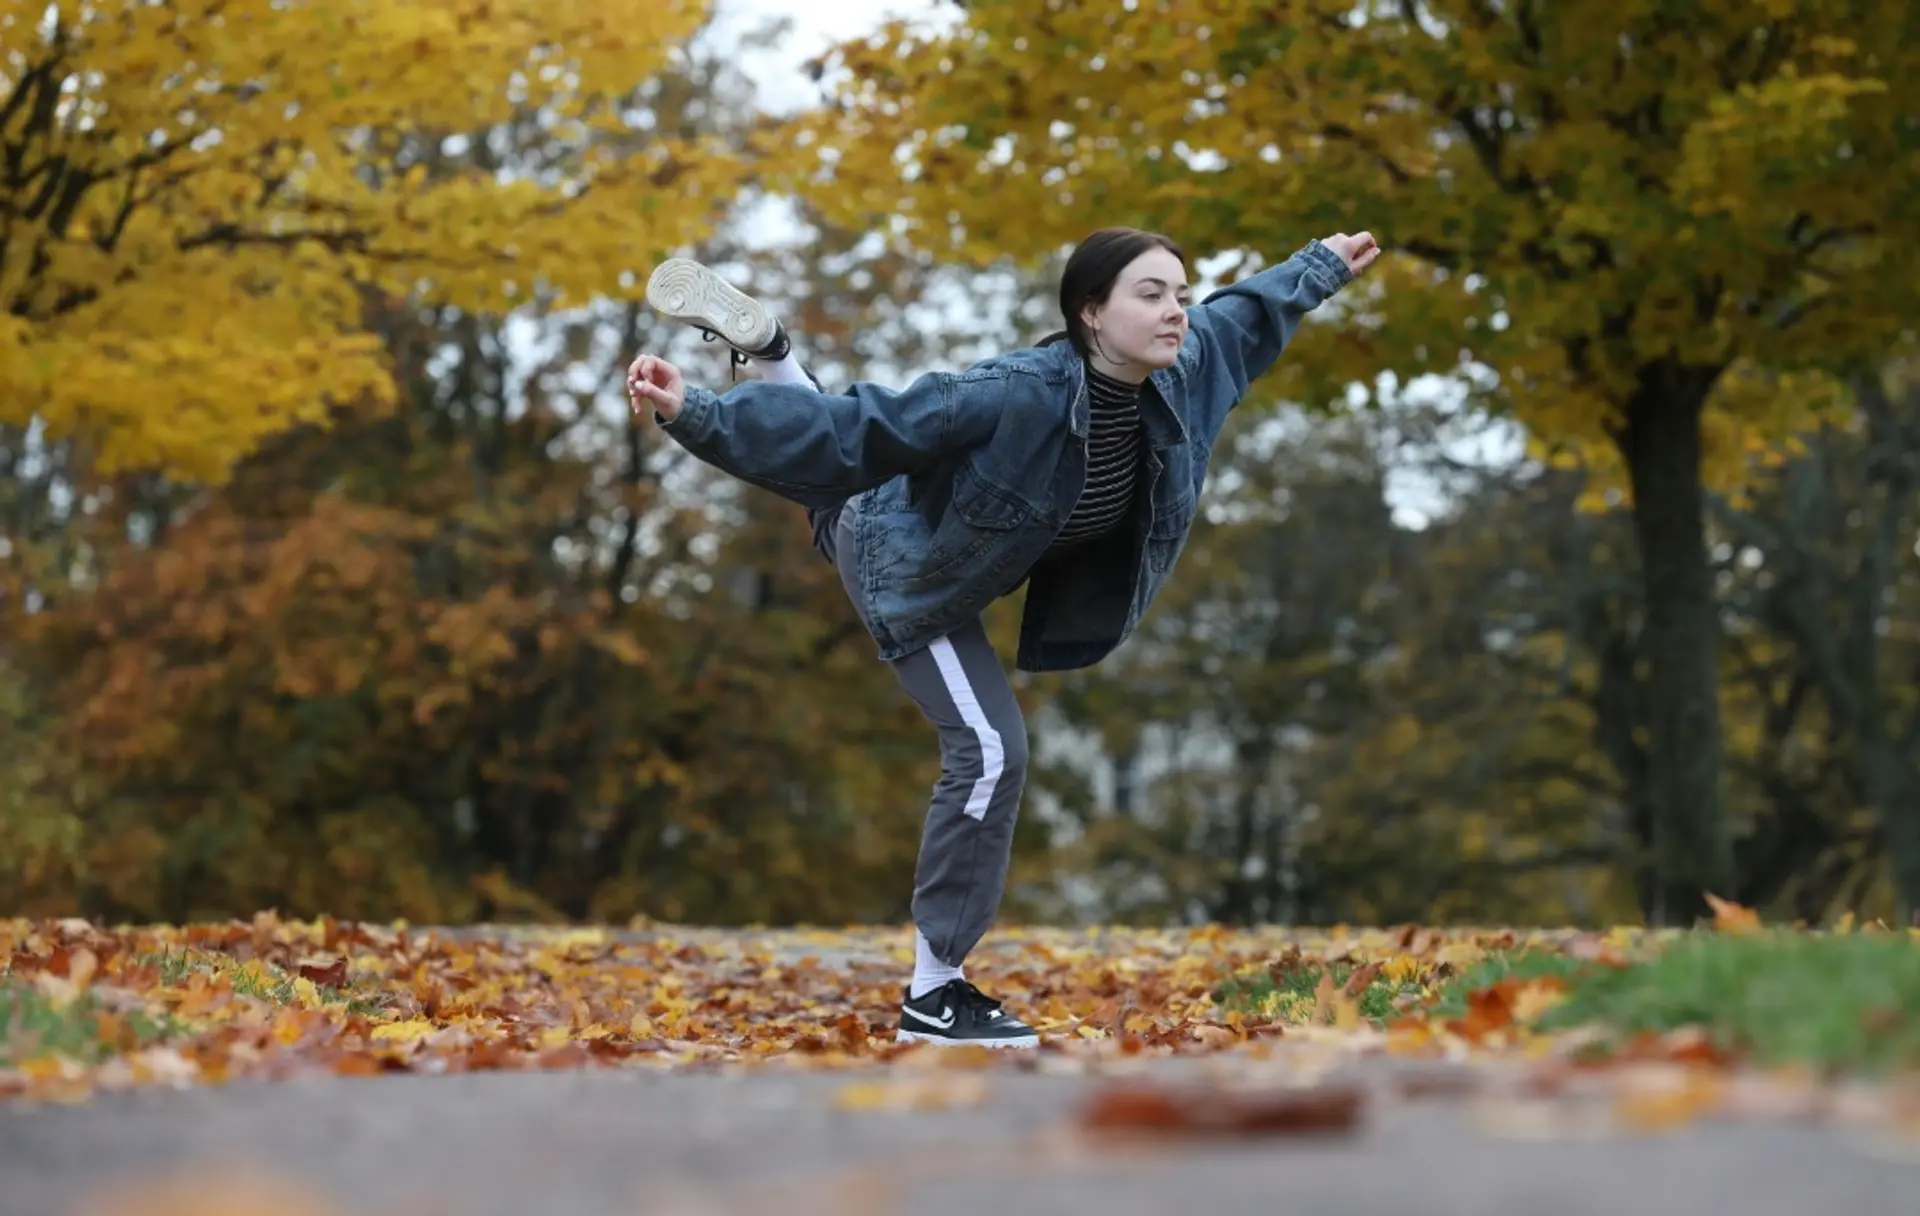 An image of a dancer posing on one bent leg, their other leg is extended behind them. Their arms are extended out from their sides. They are pictured in an autumn park with leaves on the ground and trees with yellow leaves in the background. 